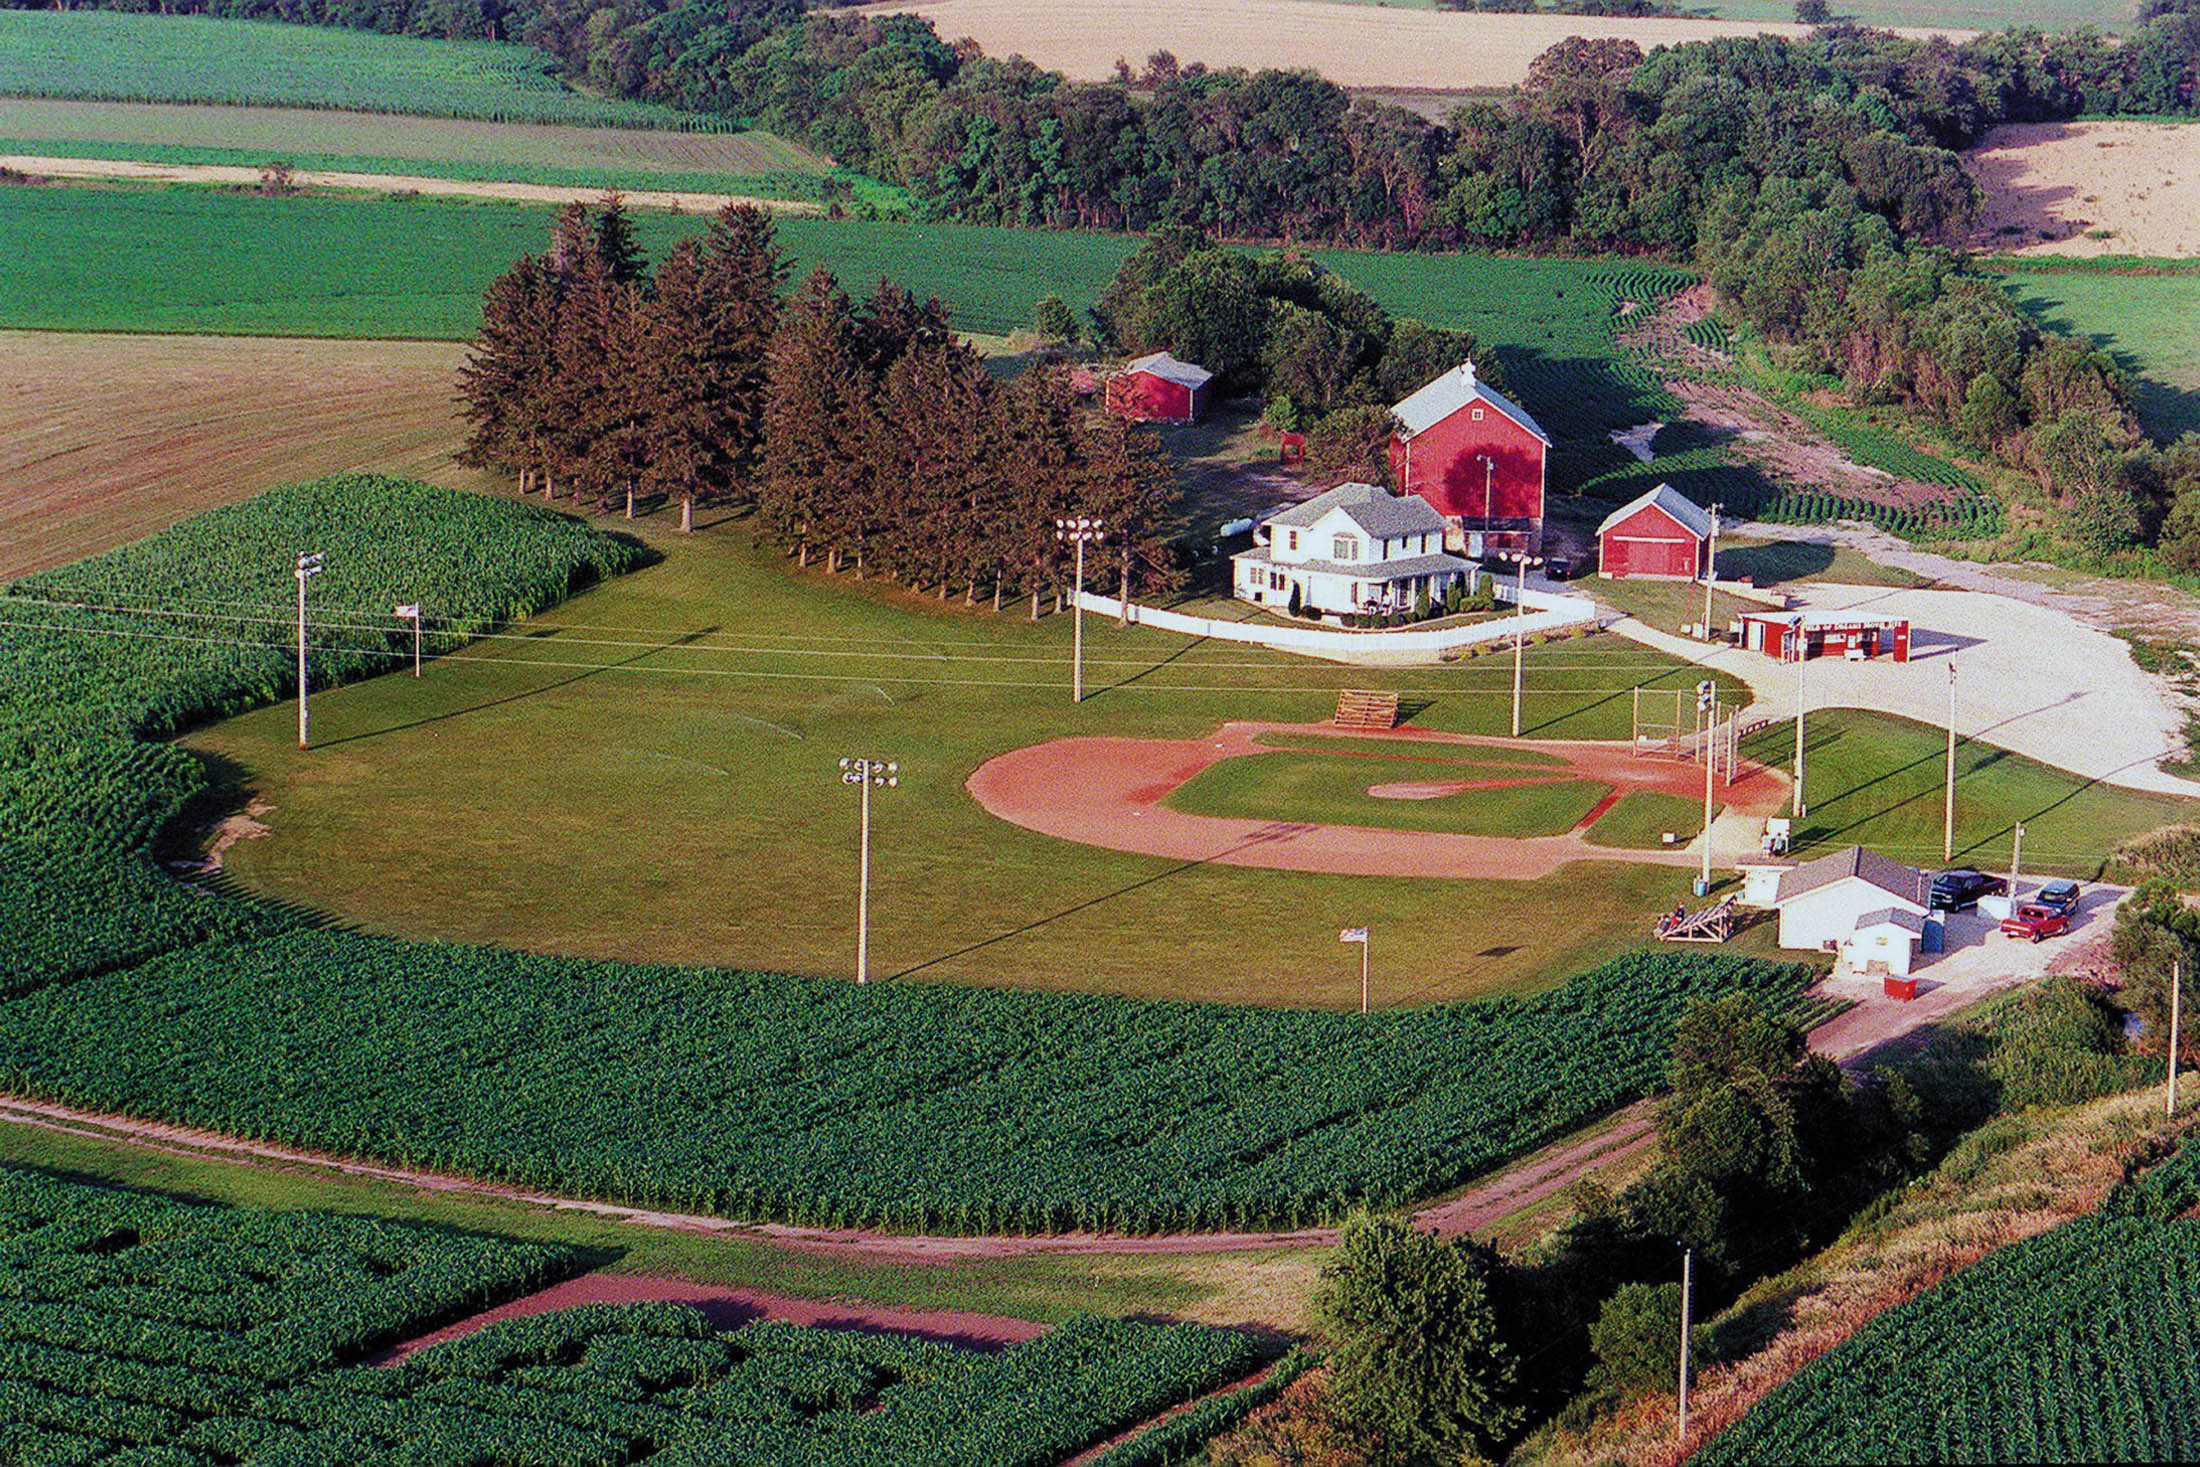 Field of Dreams': A history of the Dyersville, Iowa, movie site